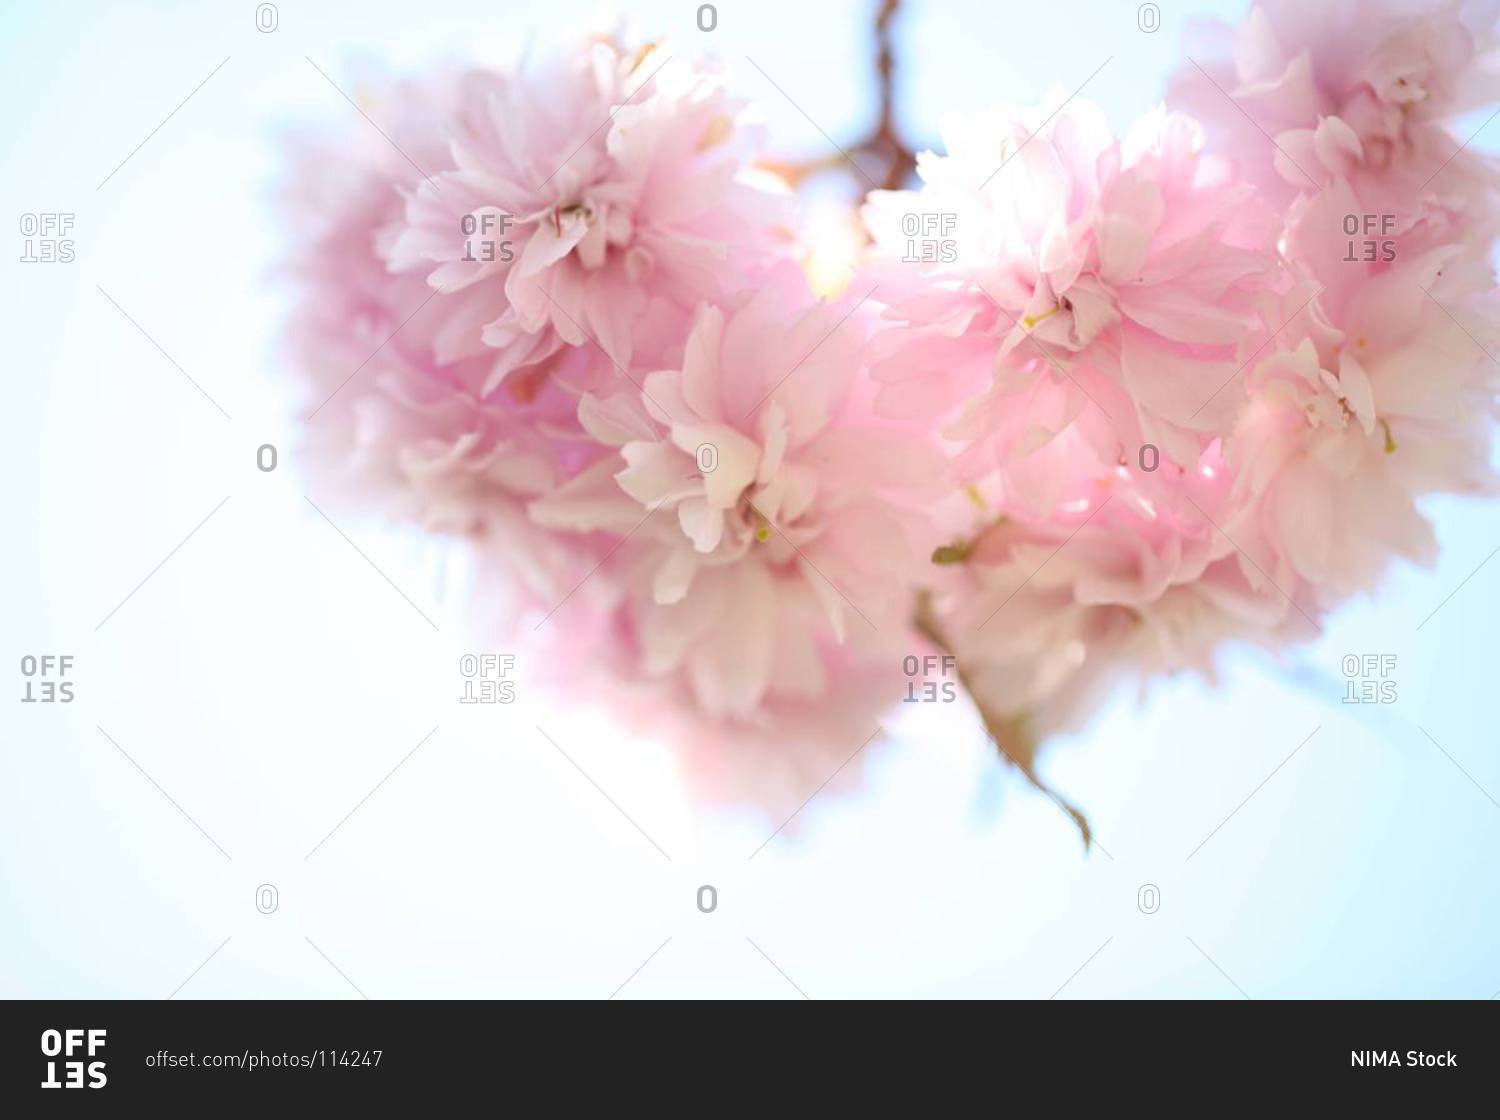 Bunch of pink cherry tree flowers hanging from branch